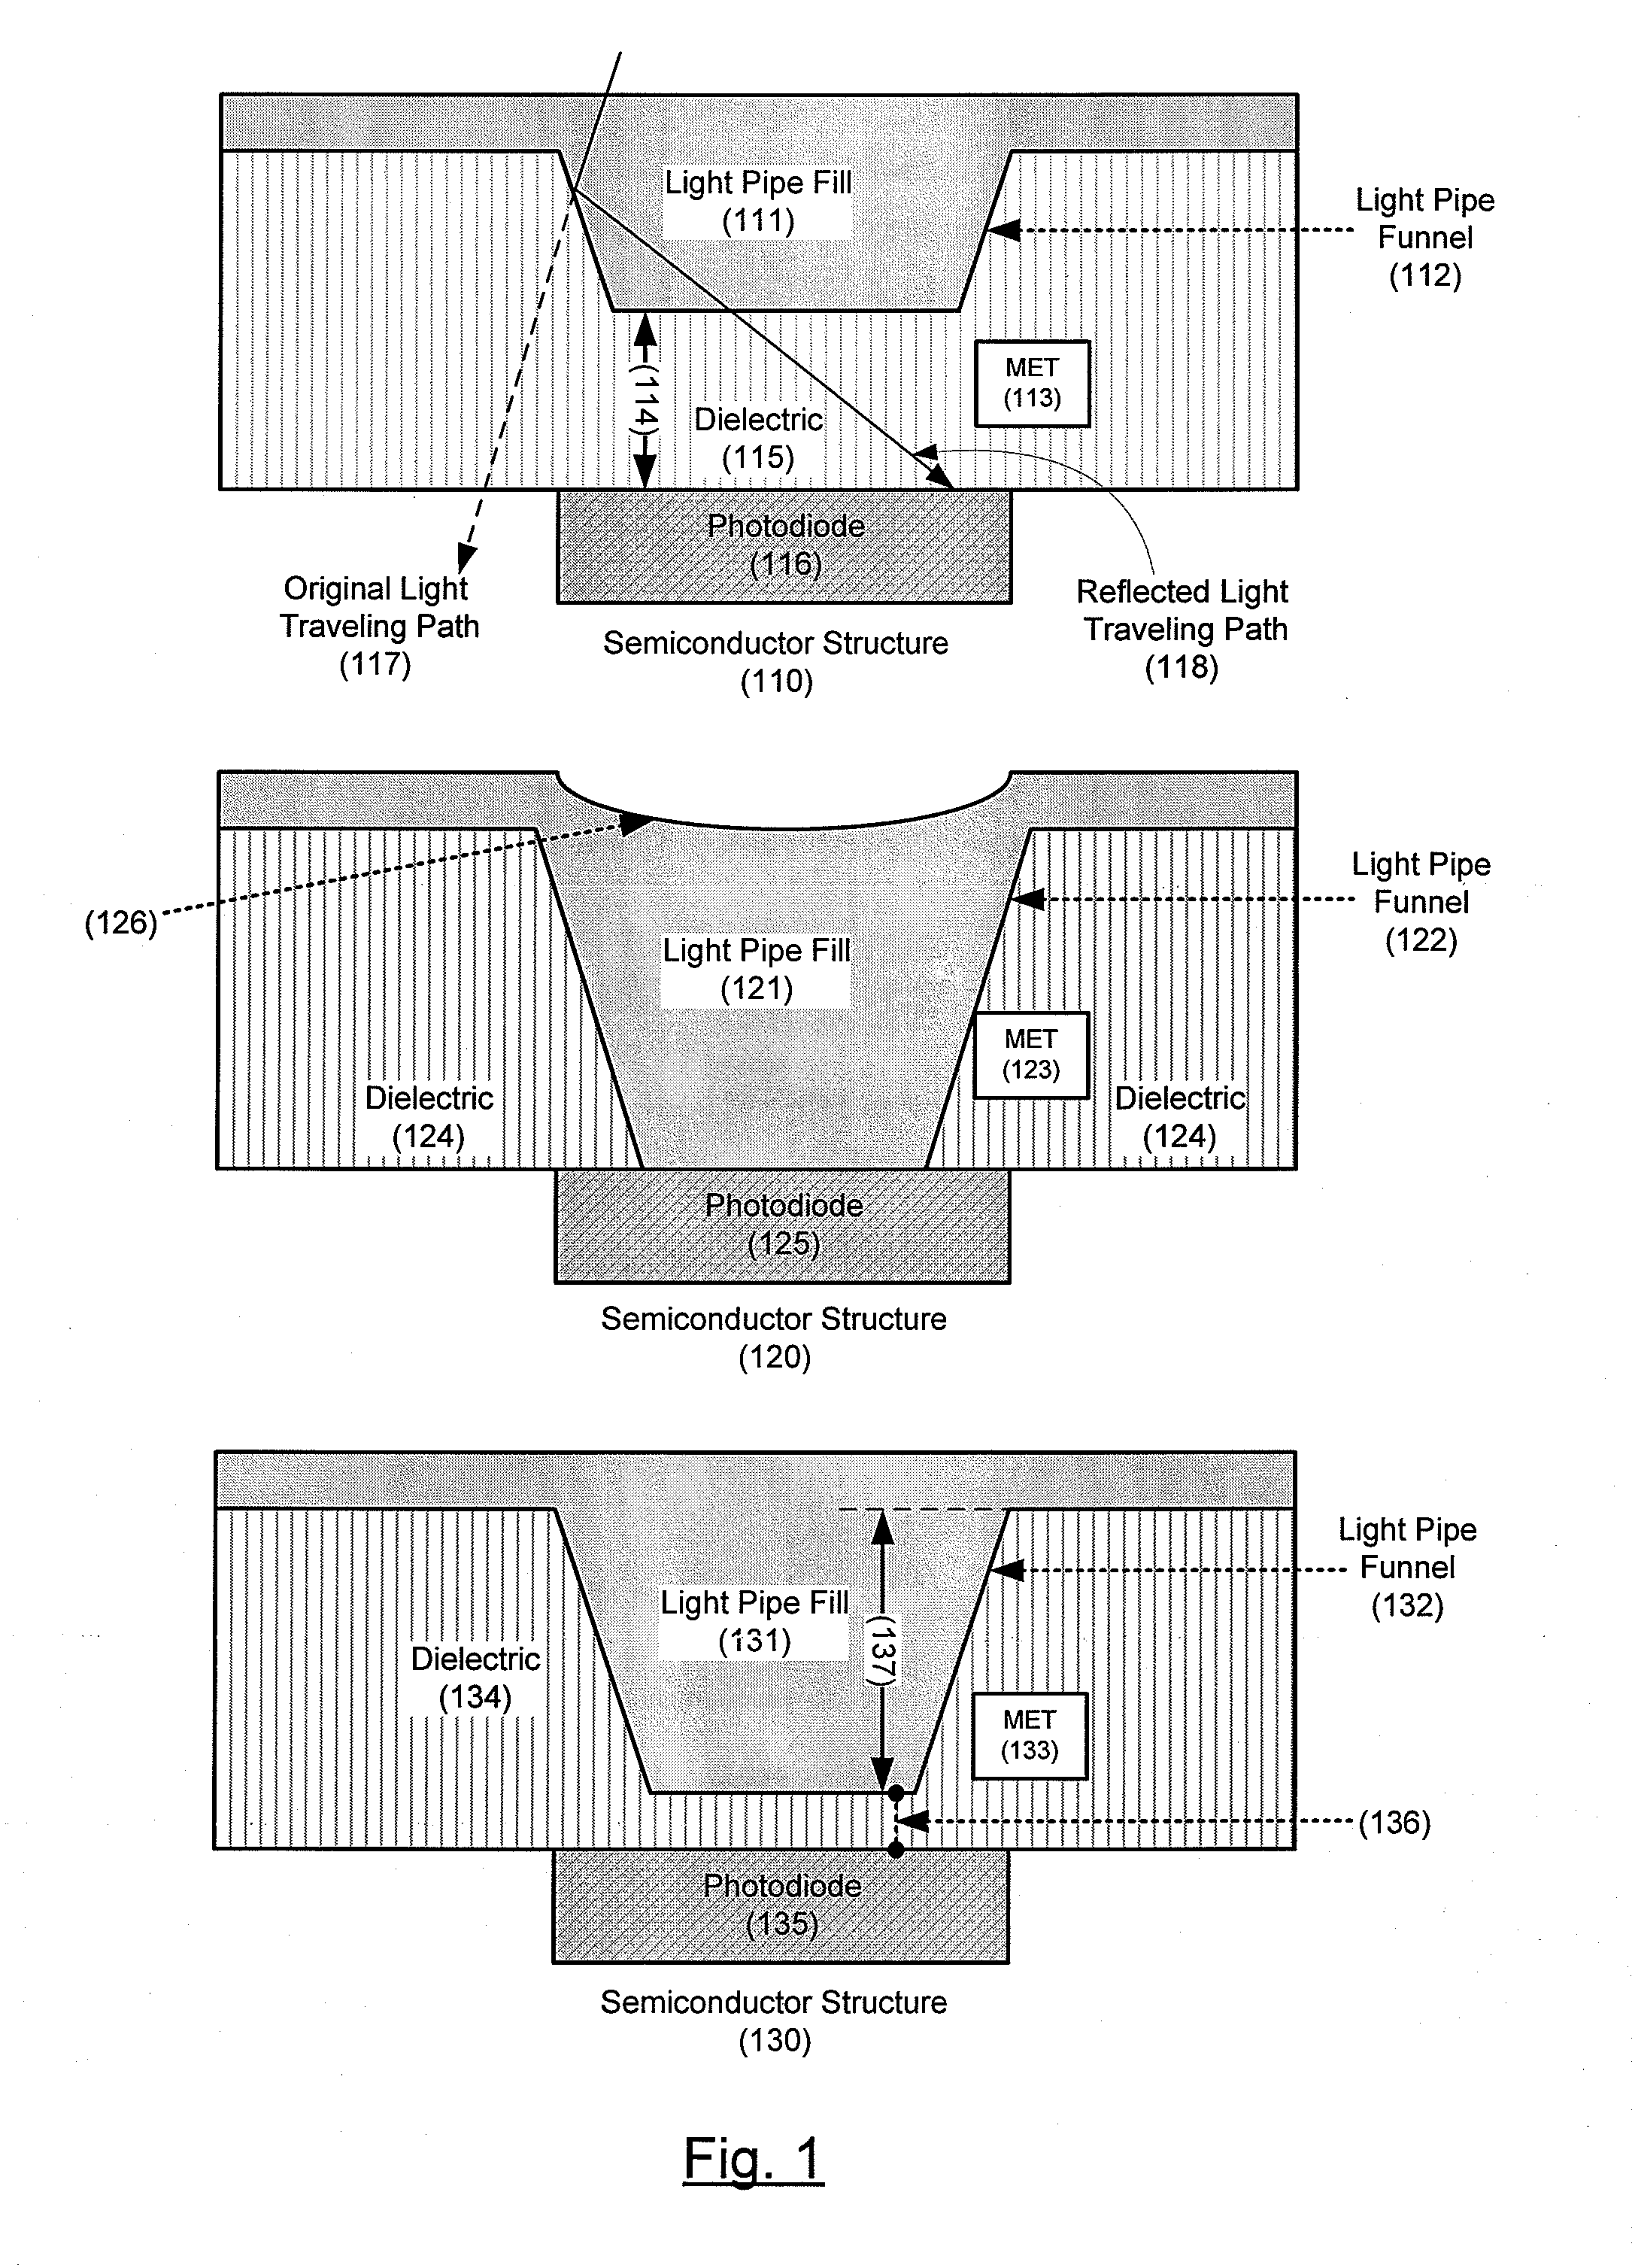 Light pipe etch control for CMOS fabrication